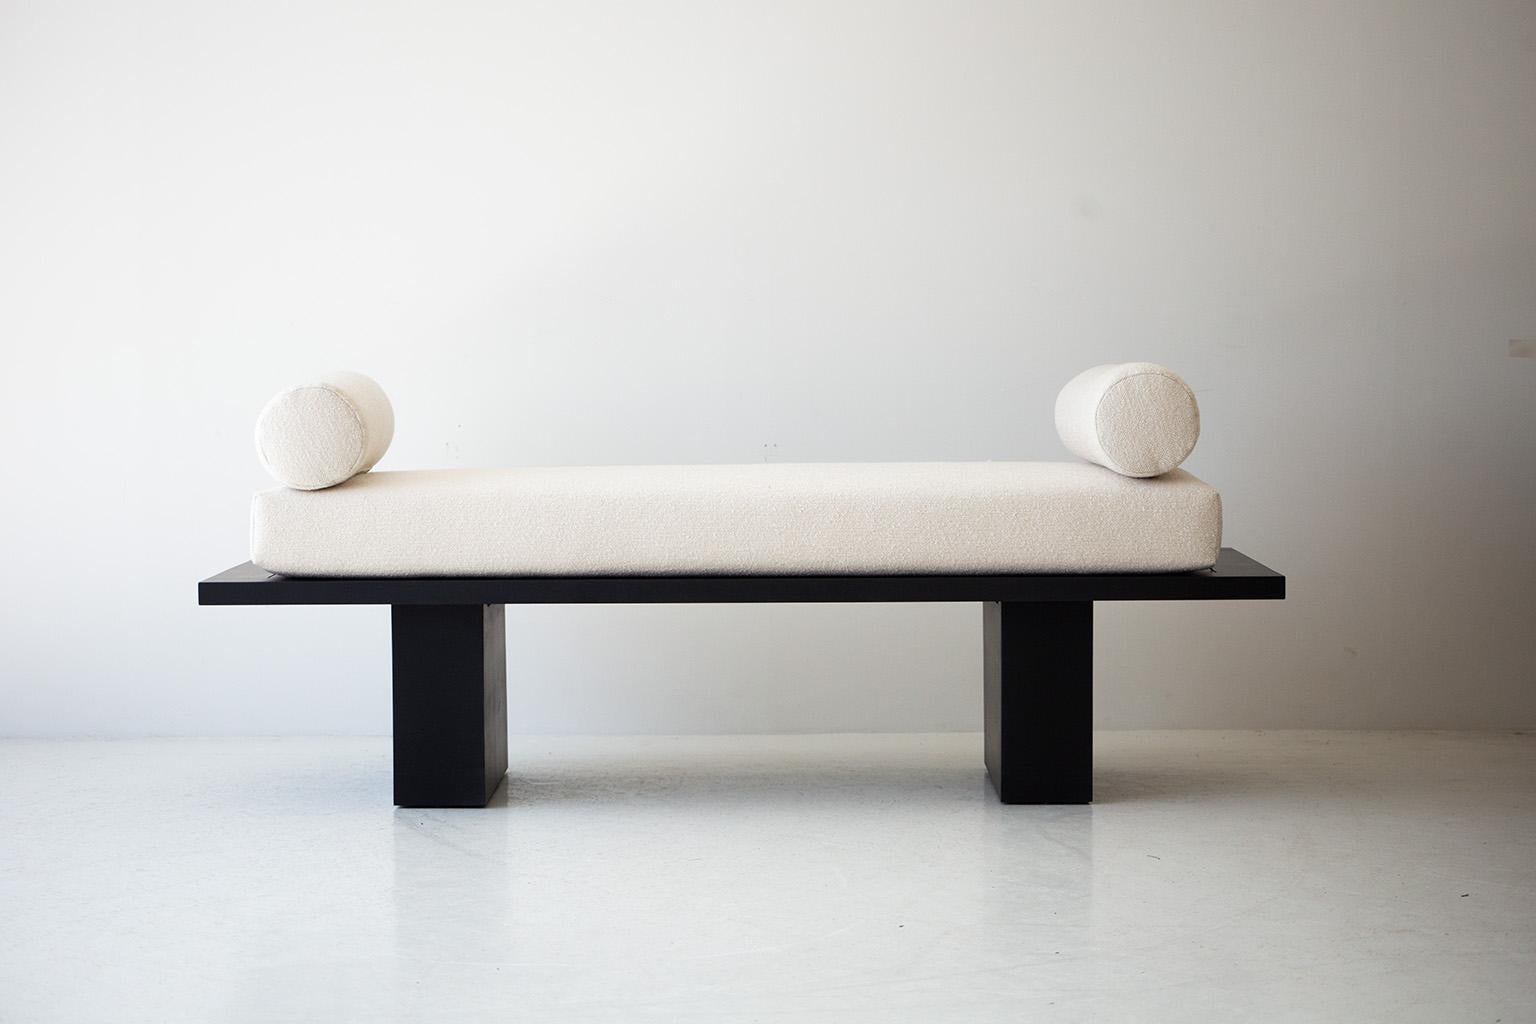 Bertu Benches, Suelo Modern Bench, Lumbar Pillows, Upholstered, White, Black

This Suelo Modern Daybed is beautifully constructed from solid wood in Ohio, USA. This silhouette is simple, modern, and sleek, topped with a comfortable cushion. This is